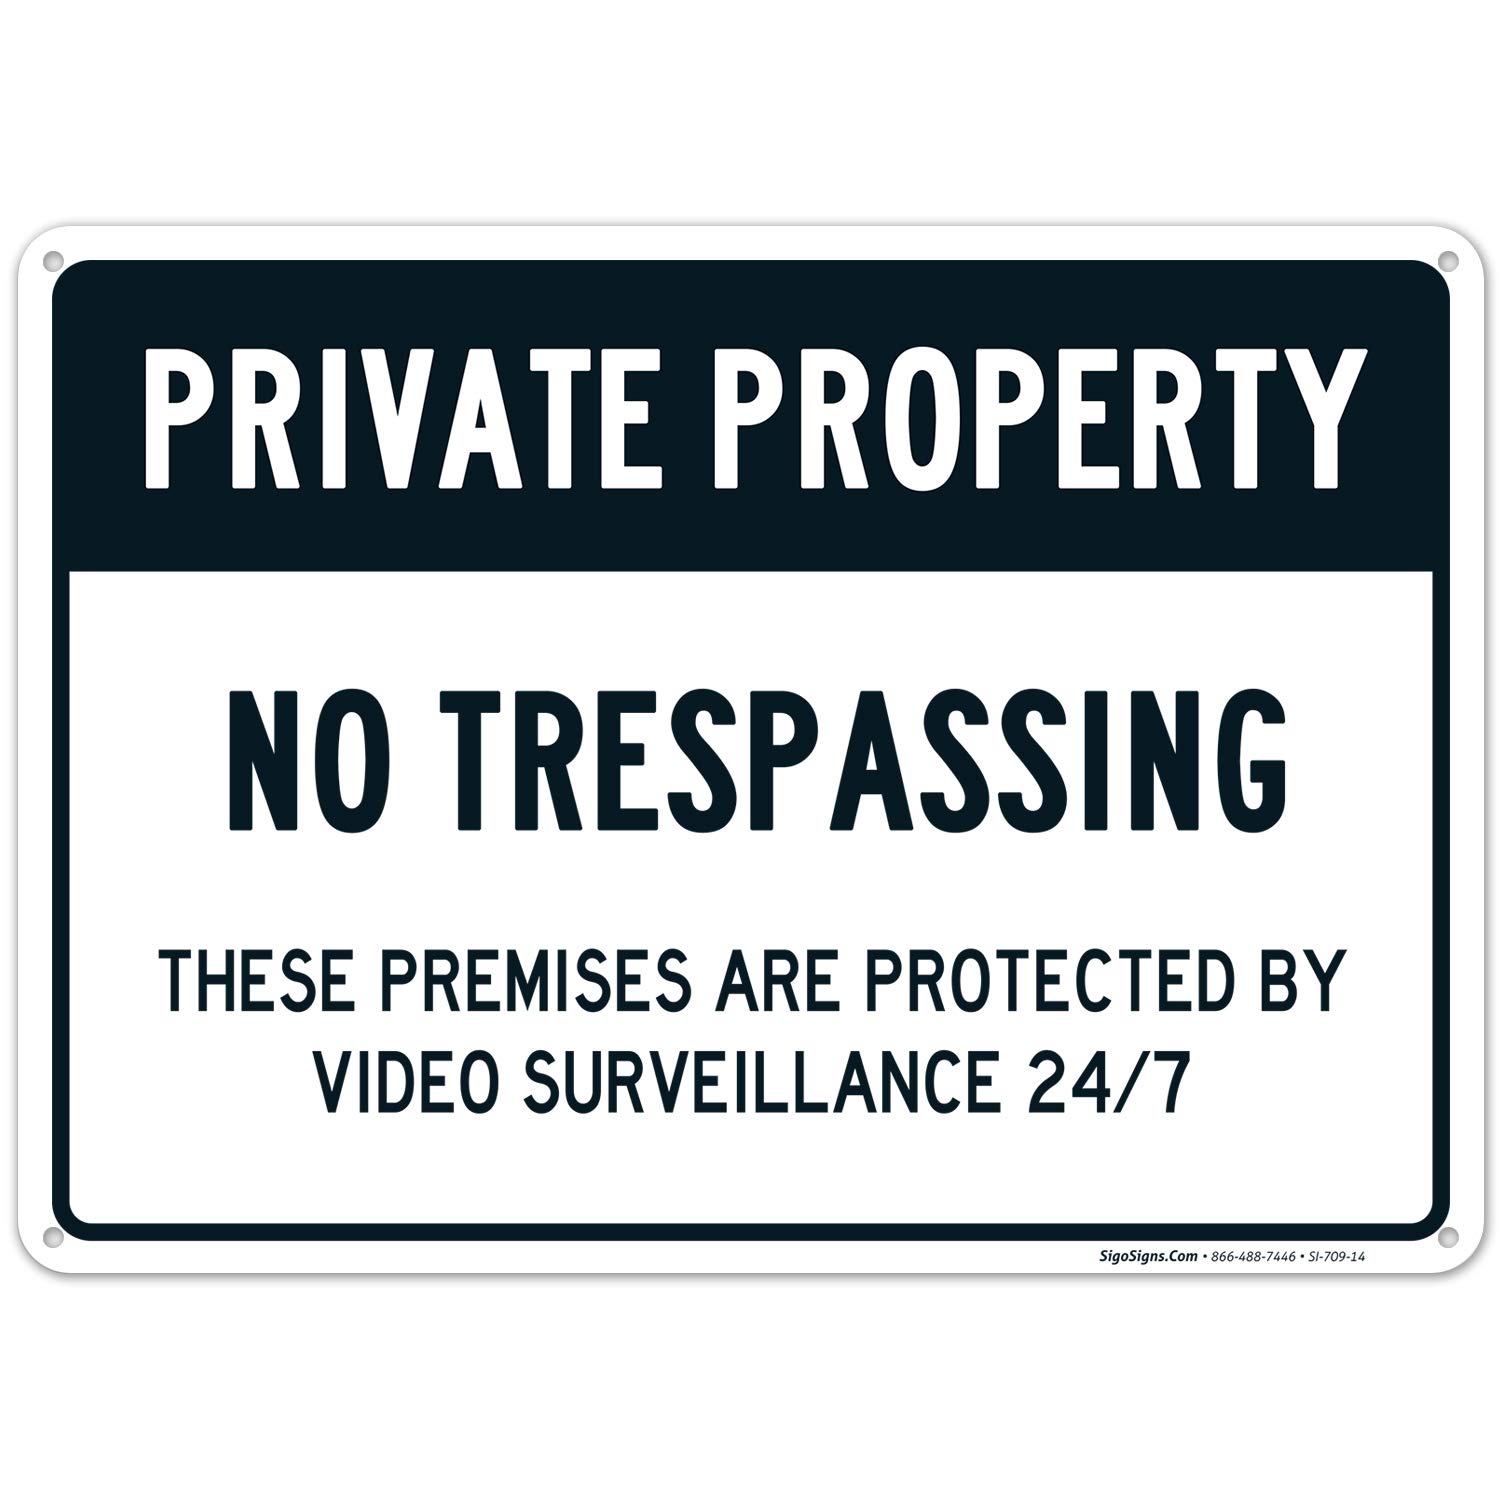 Hiking 10 x 14 3M Engineer Grade Reflective Aluminum Motorized Vehicles Are Forbidden” Sign SmartSign “No Trespassing Private Property Hunting Fishing 